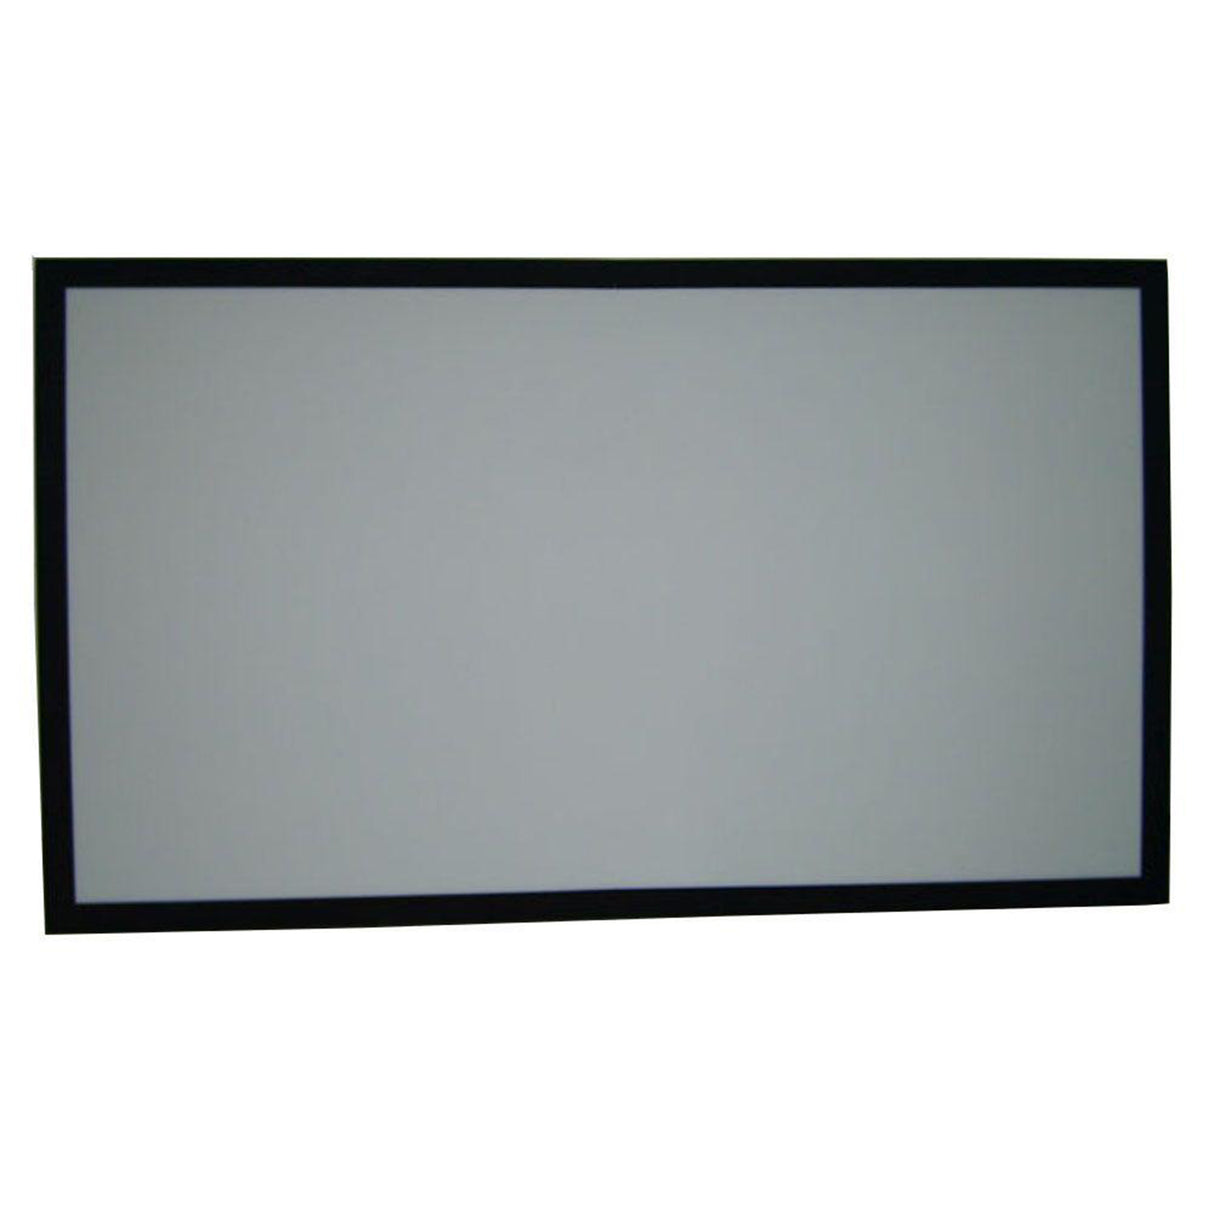 Prime Eco-line Grey Fabric Ambient Light Rejection (ALR) Flat Fixed Frame Projection Screen 150" (For Long Throw Projectors)